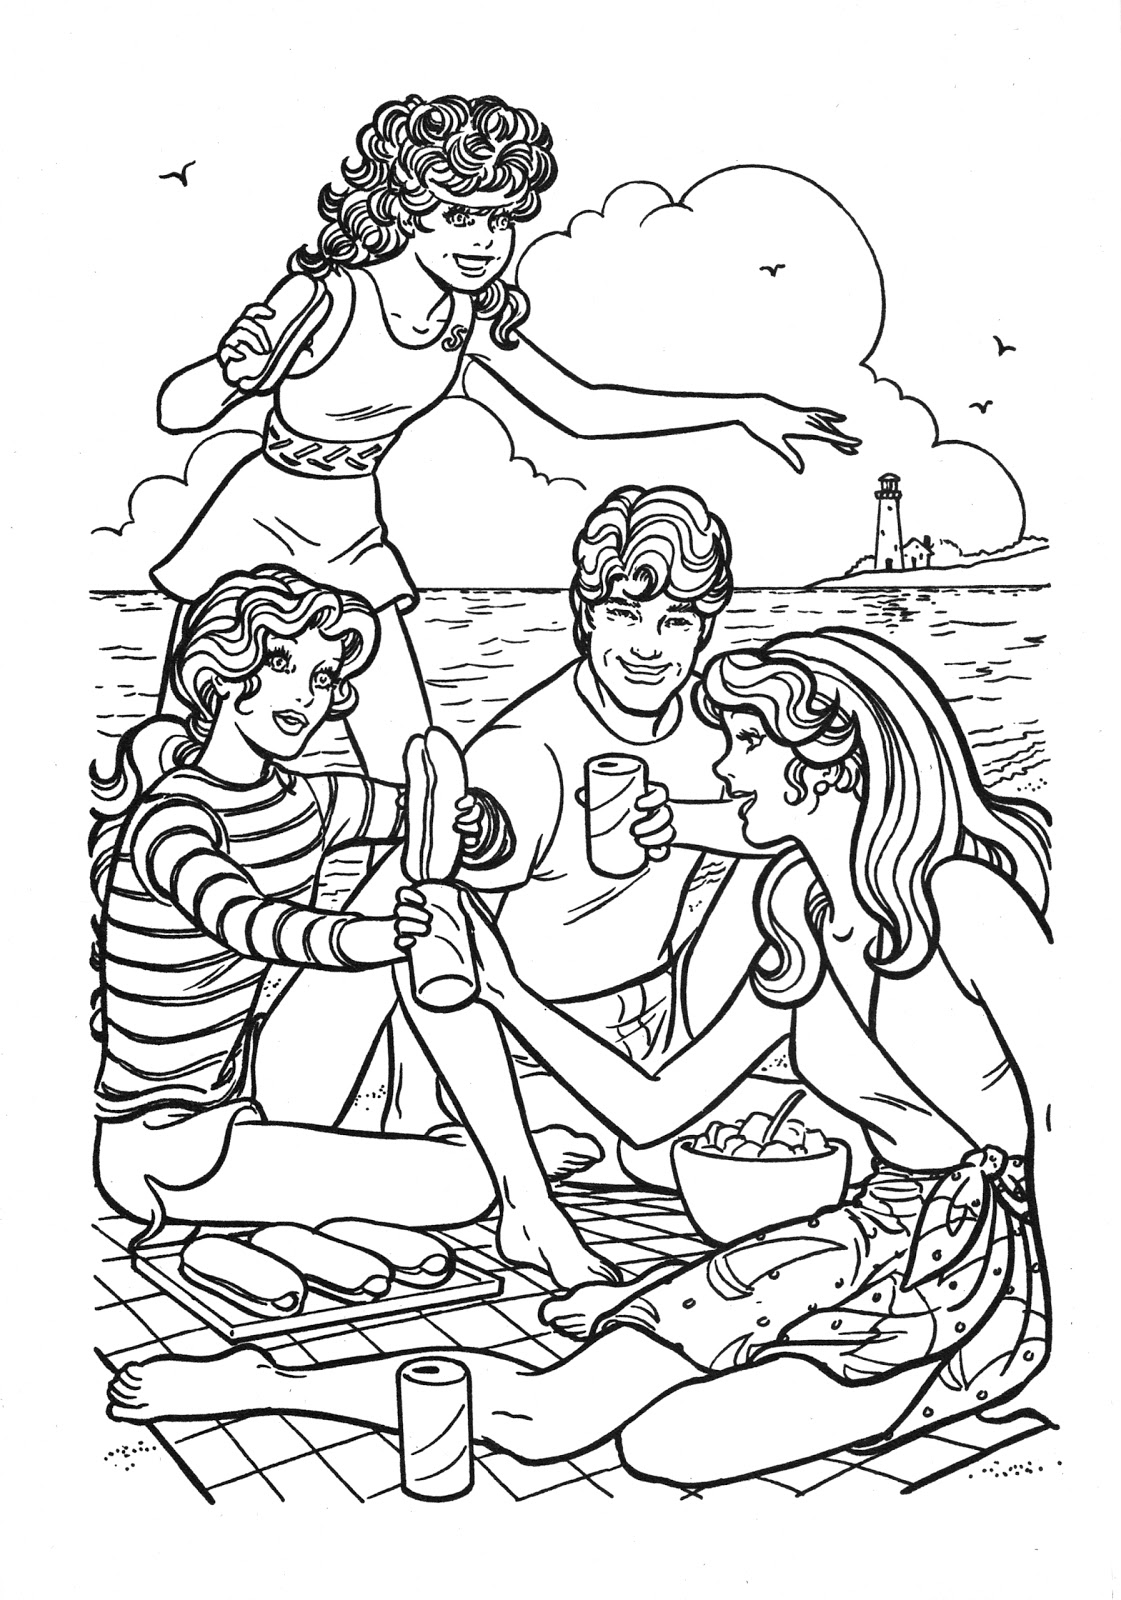 Download BARBIE COLORING PAGES: KEN AND BARBIE - MATTEL'S PERFECT ...